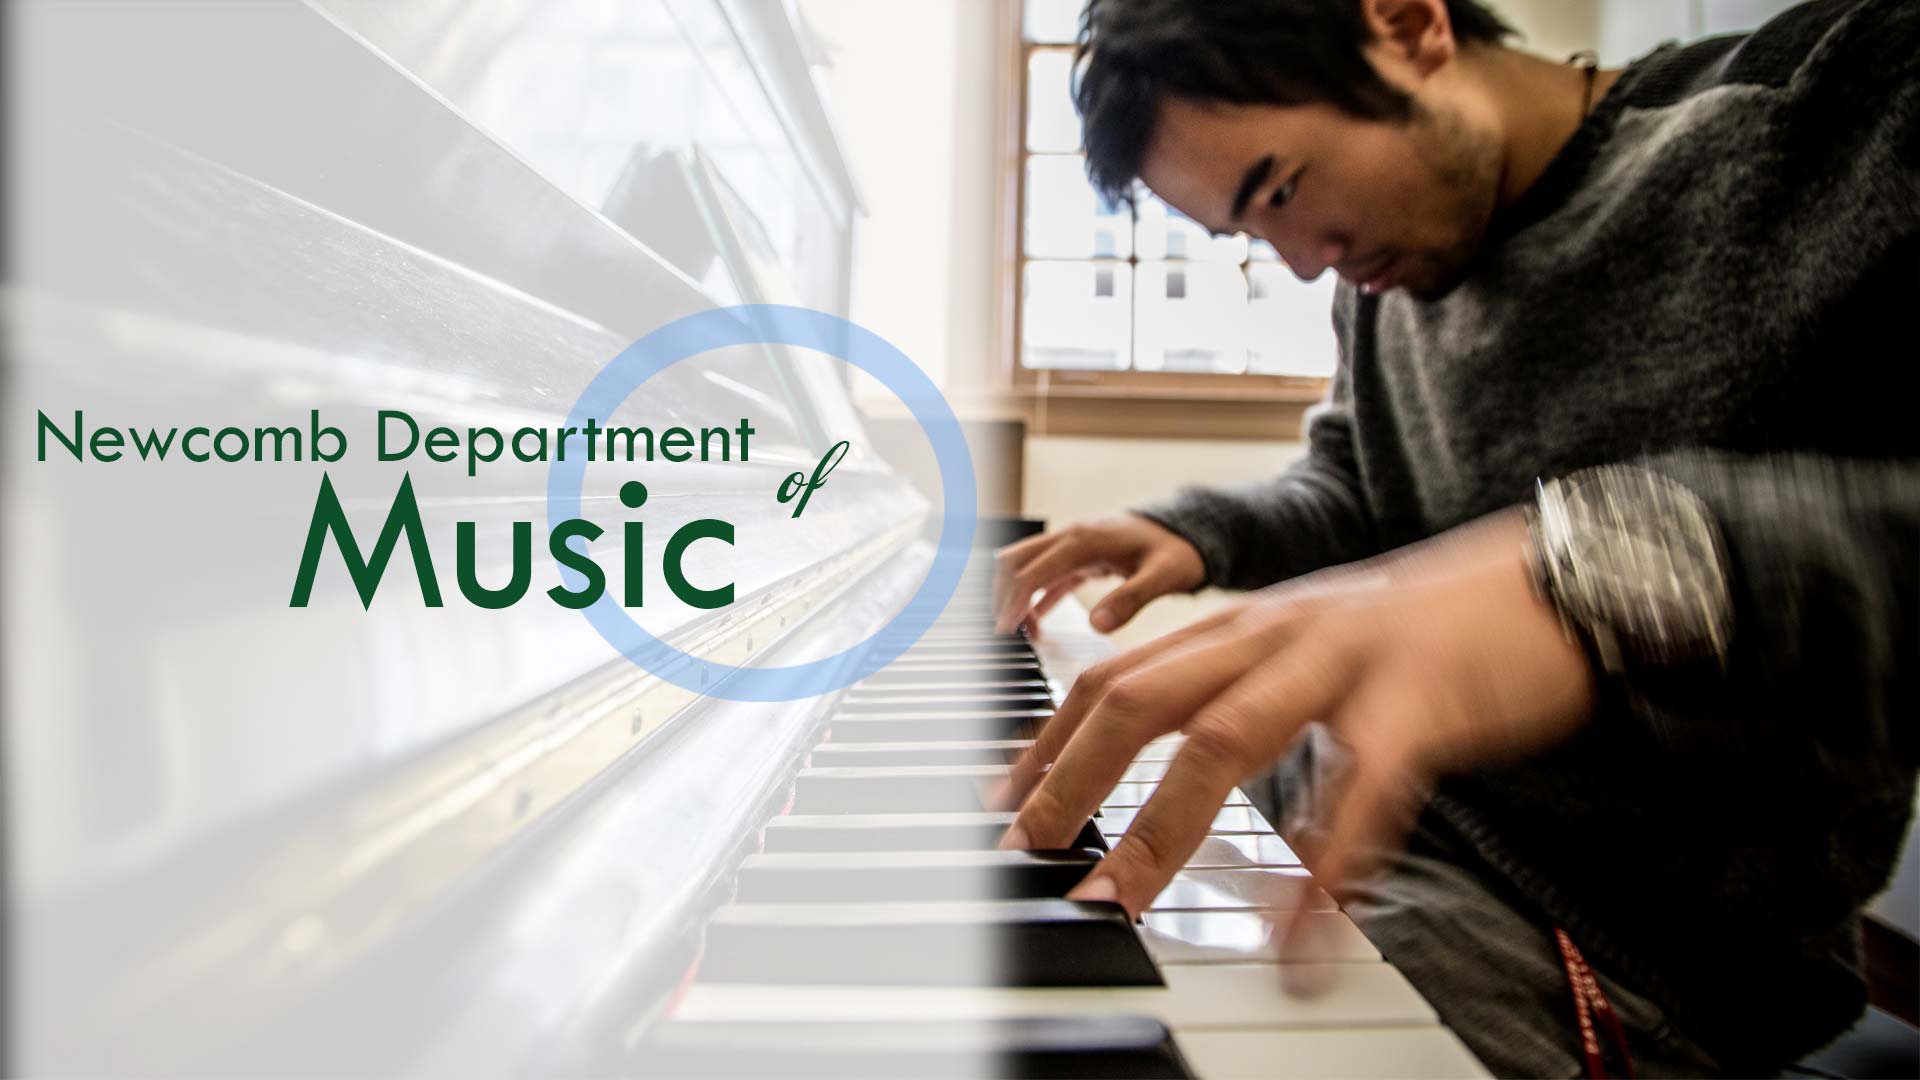 Newcomb Department of Music